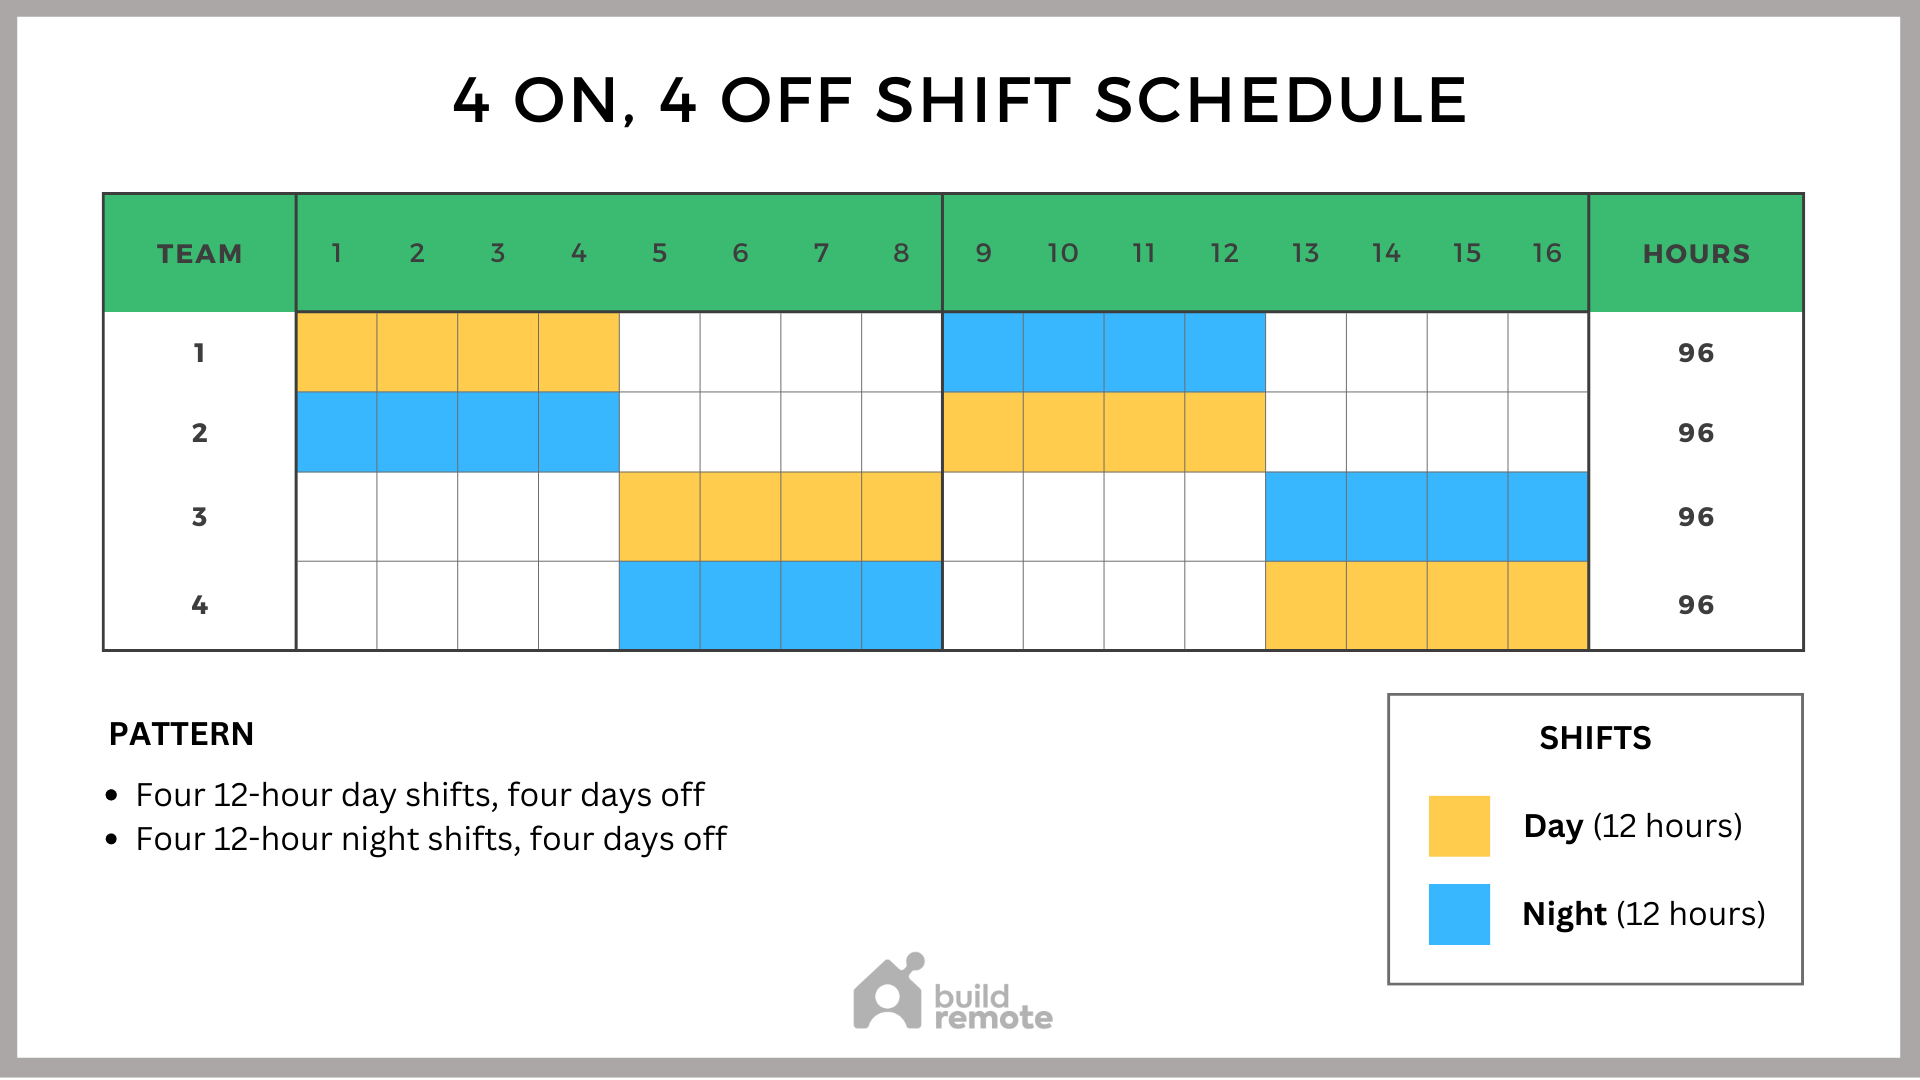 4 On, 4 Off Schedule Template (12Hour Shifts) Buildremote